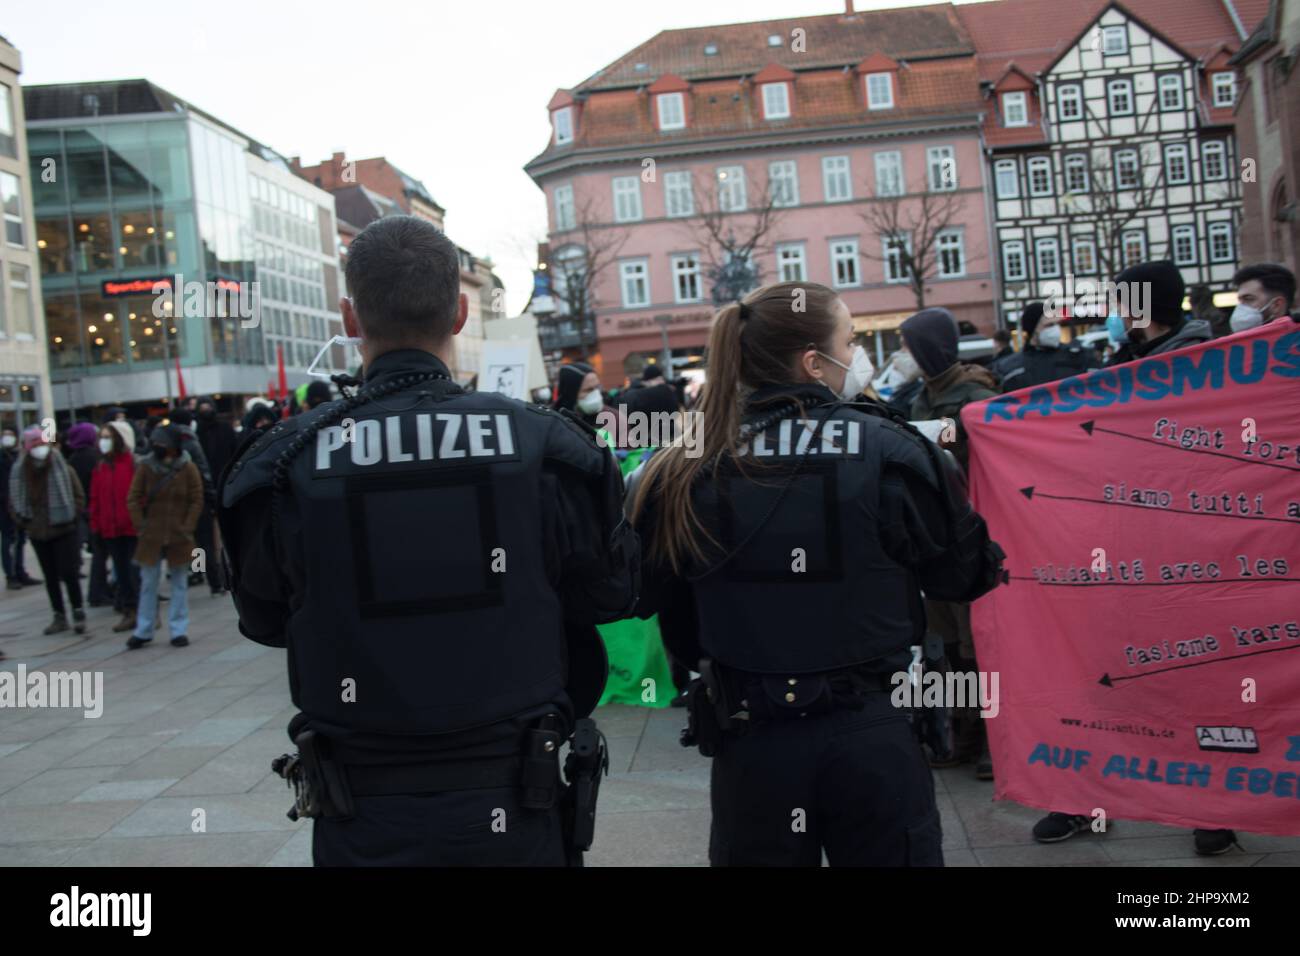 Protests were held across Germany on Saturday. The protesters chanted various slogans against racism. They lit candles and offered flowers in the name of the deceased. Two years ago today, nine people were killed in a racially motivated attack in Hanau. (Photo by Tubal Sapkota/Pacific Press) Credit: Pacific Press Media Production Corp./Alamy Live News Stock Photo